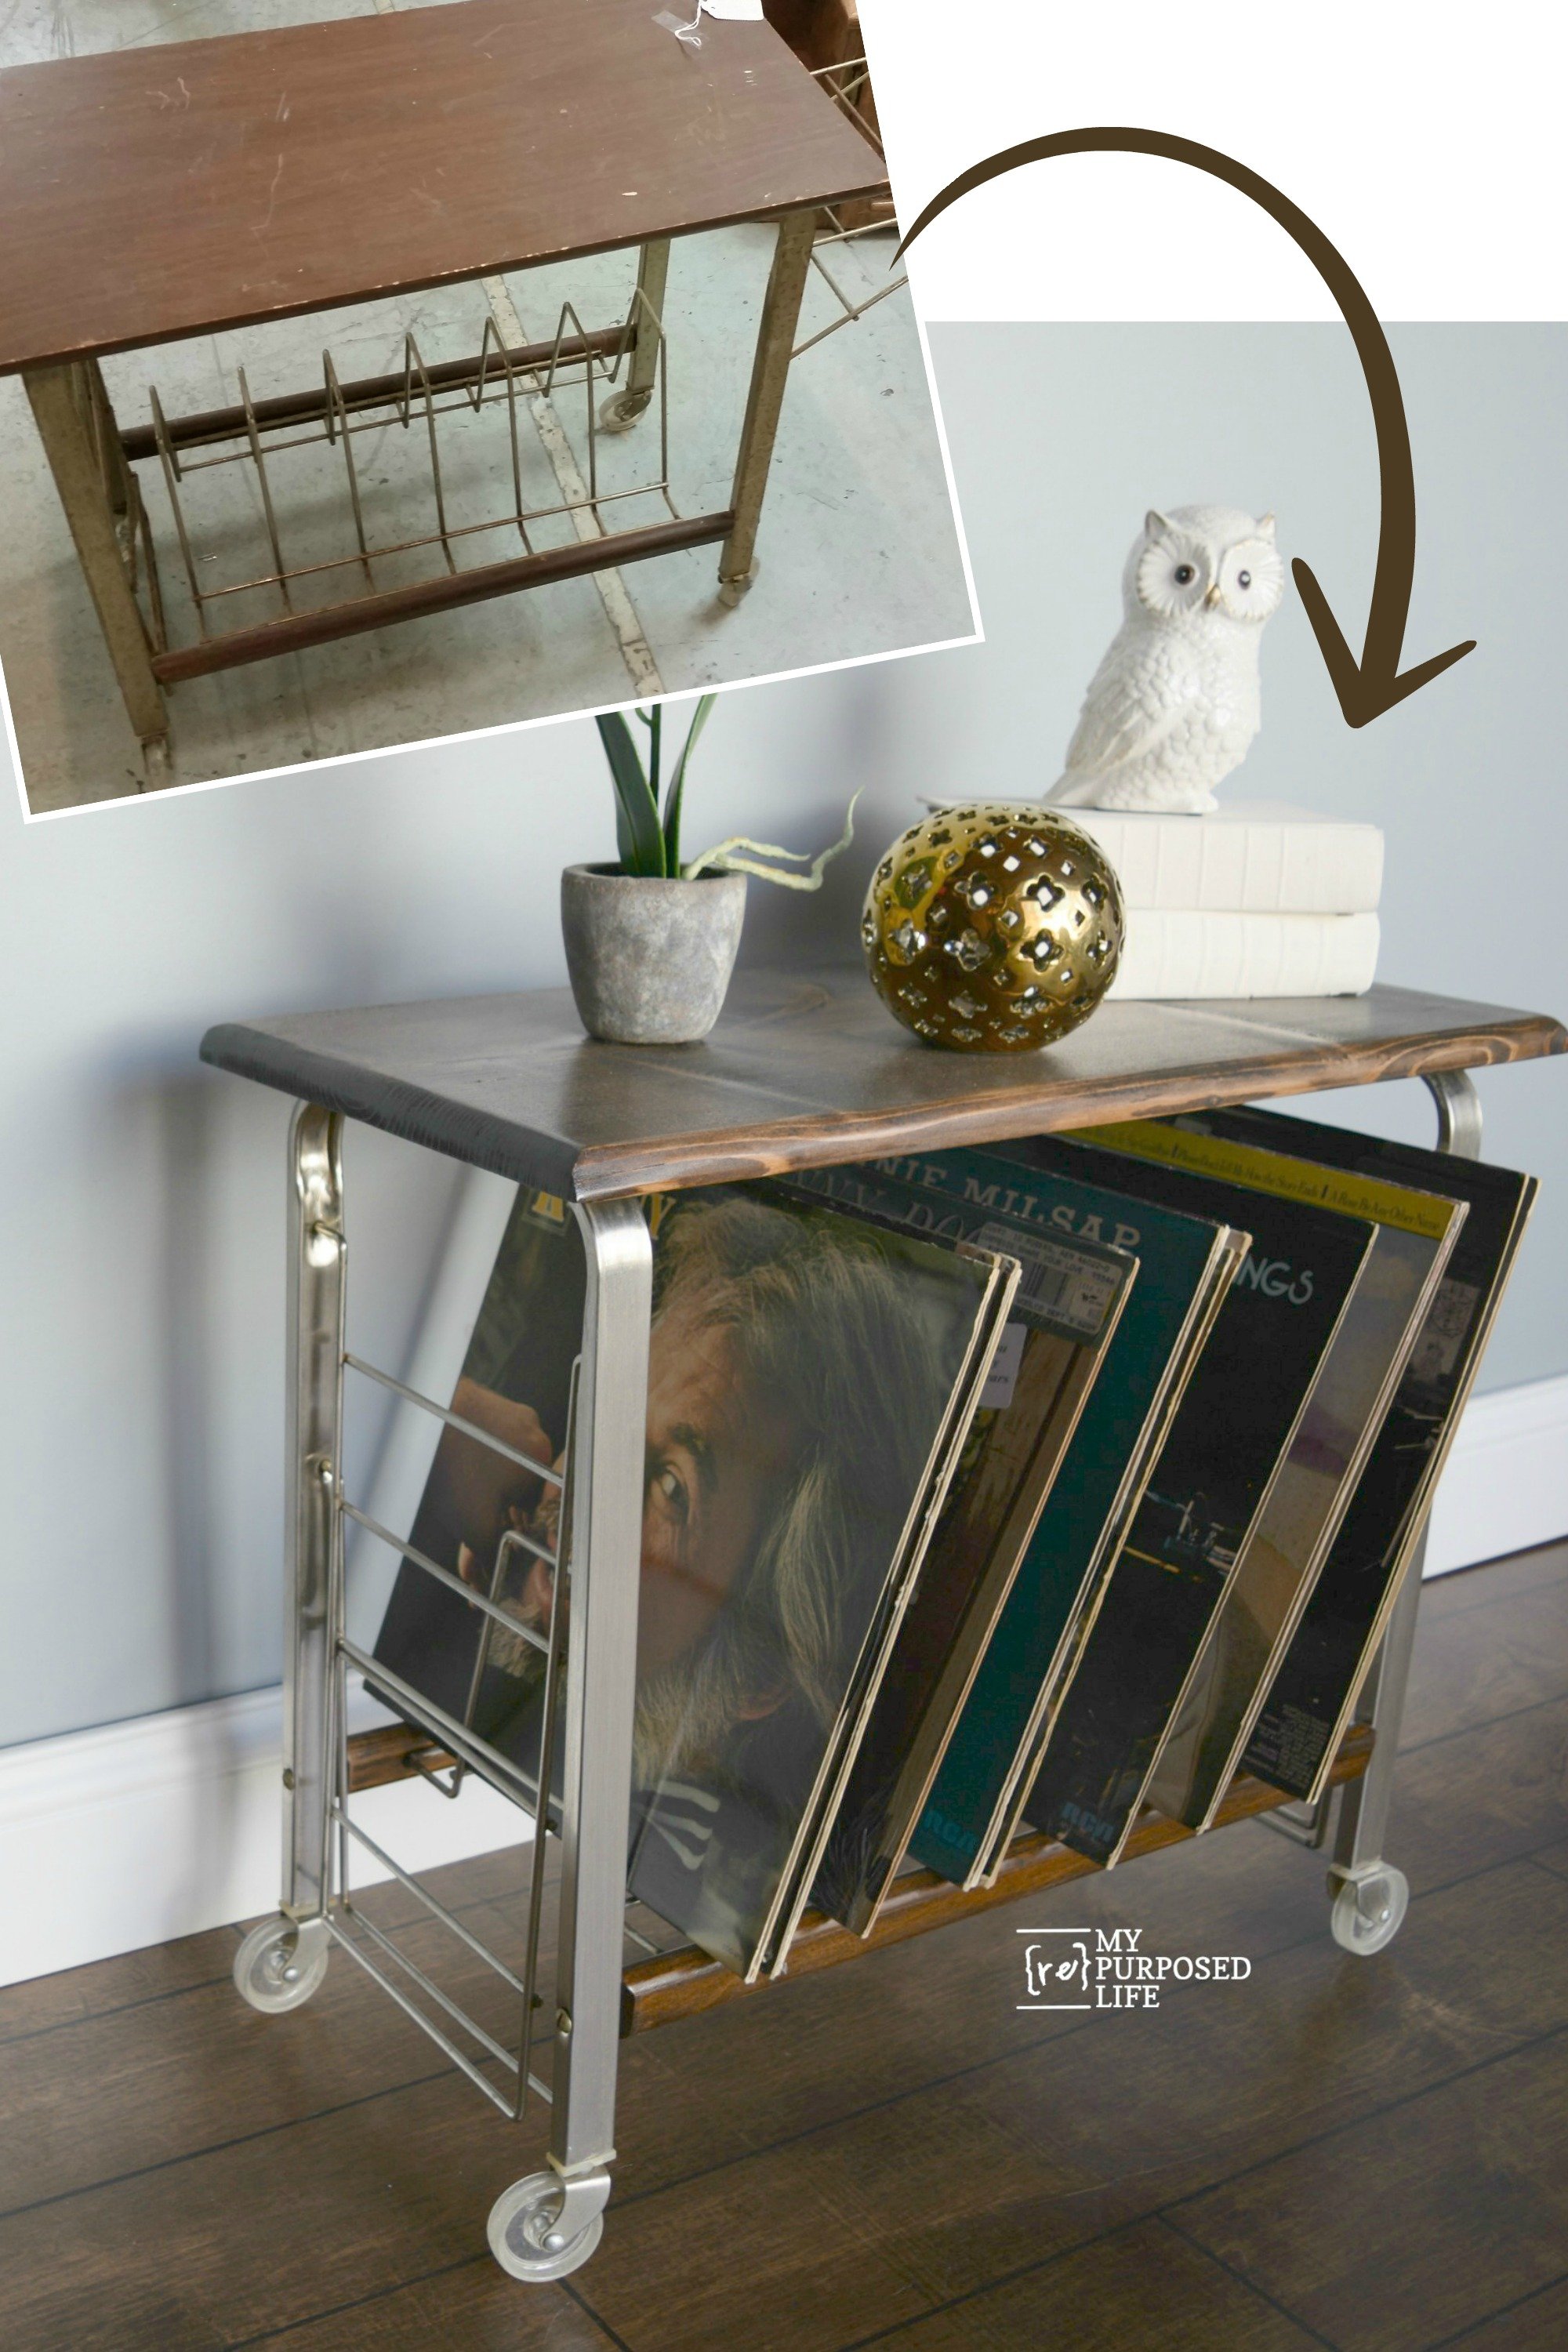 A vintage record table found used and abused for $5 at a thrift store gets a great new look. Don't overlook great bones, the blemishes can be fixed. #MyRepurposedLife #vintage #record #table #thriftstorefind #makeover via @repurposedlife